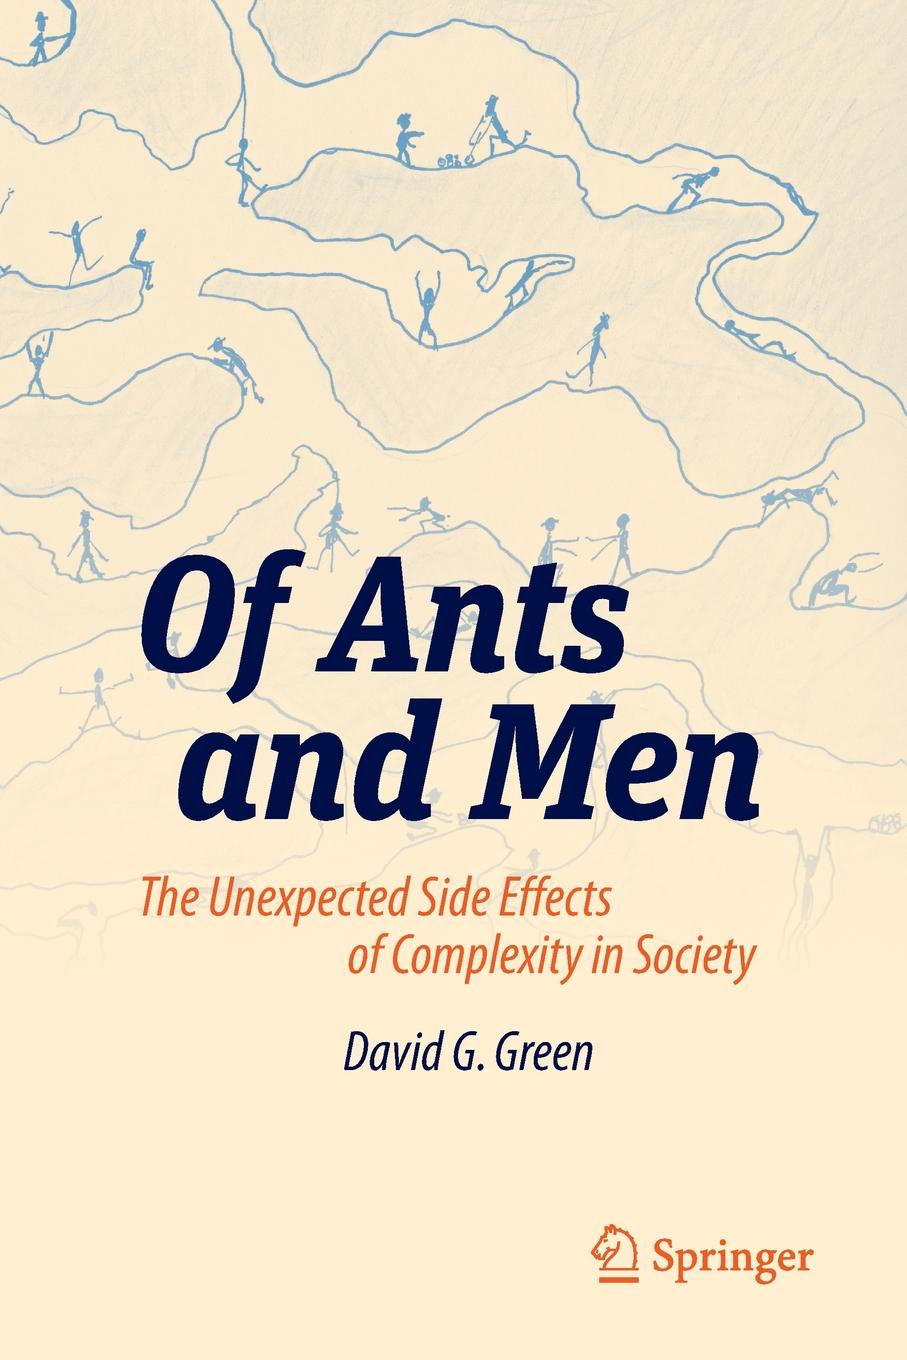 Of Ants and Men. The Unexpected Side Effects of Complexity in Society